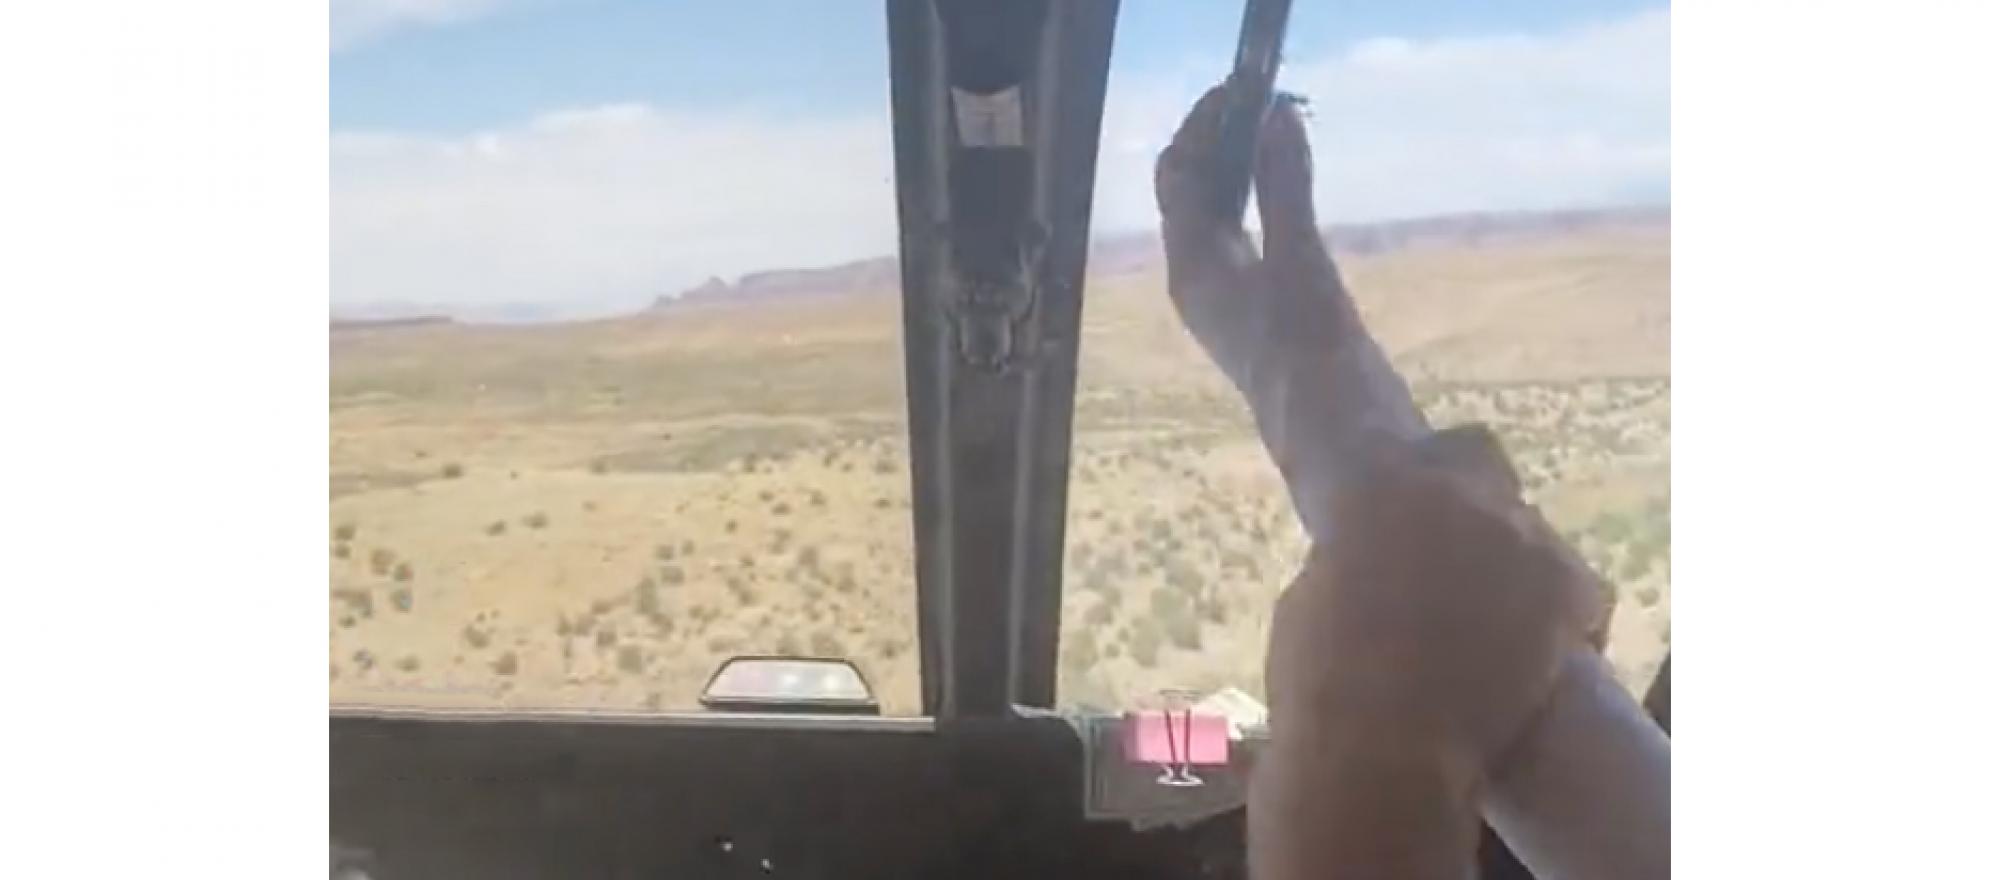 A viral video shows a passenger reaching for a rotor brake during helitour flight